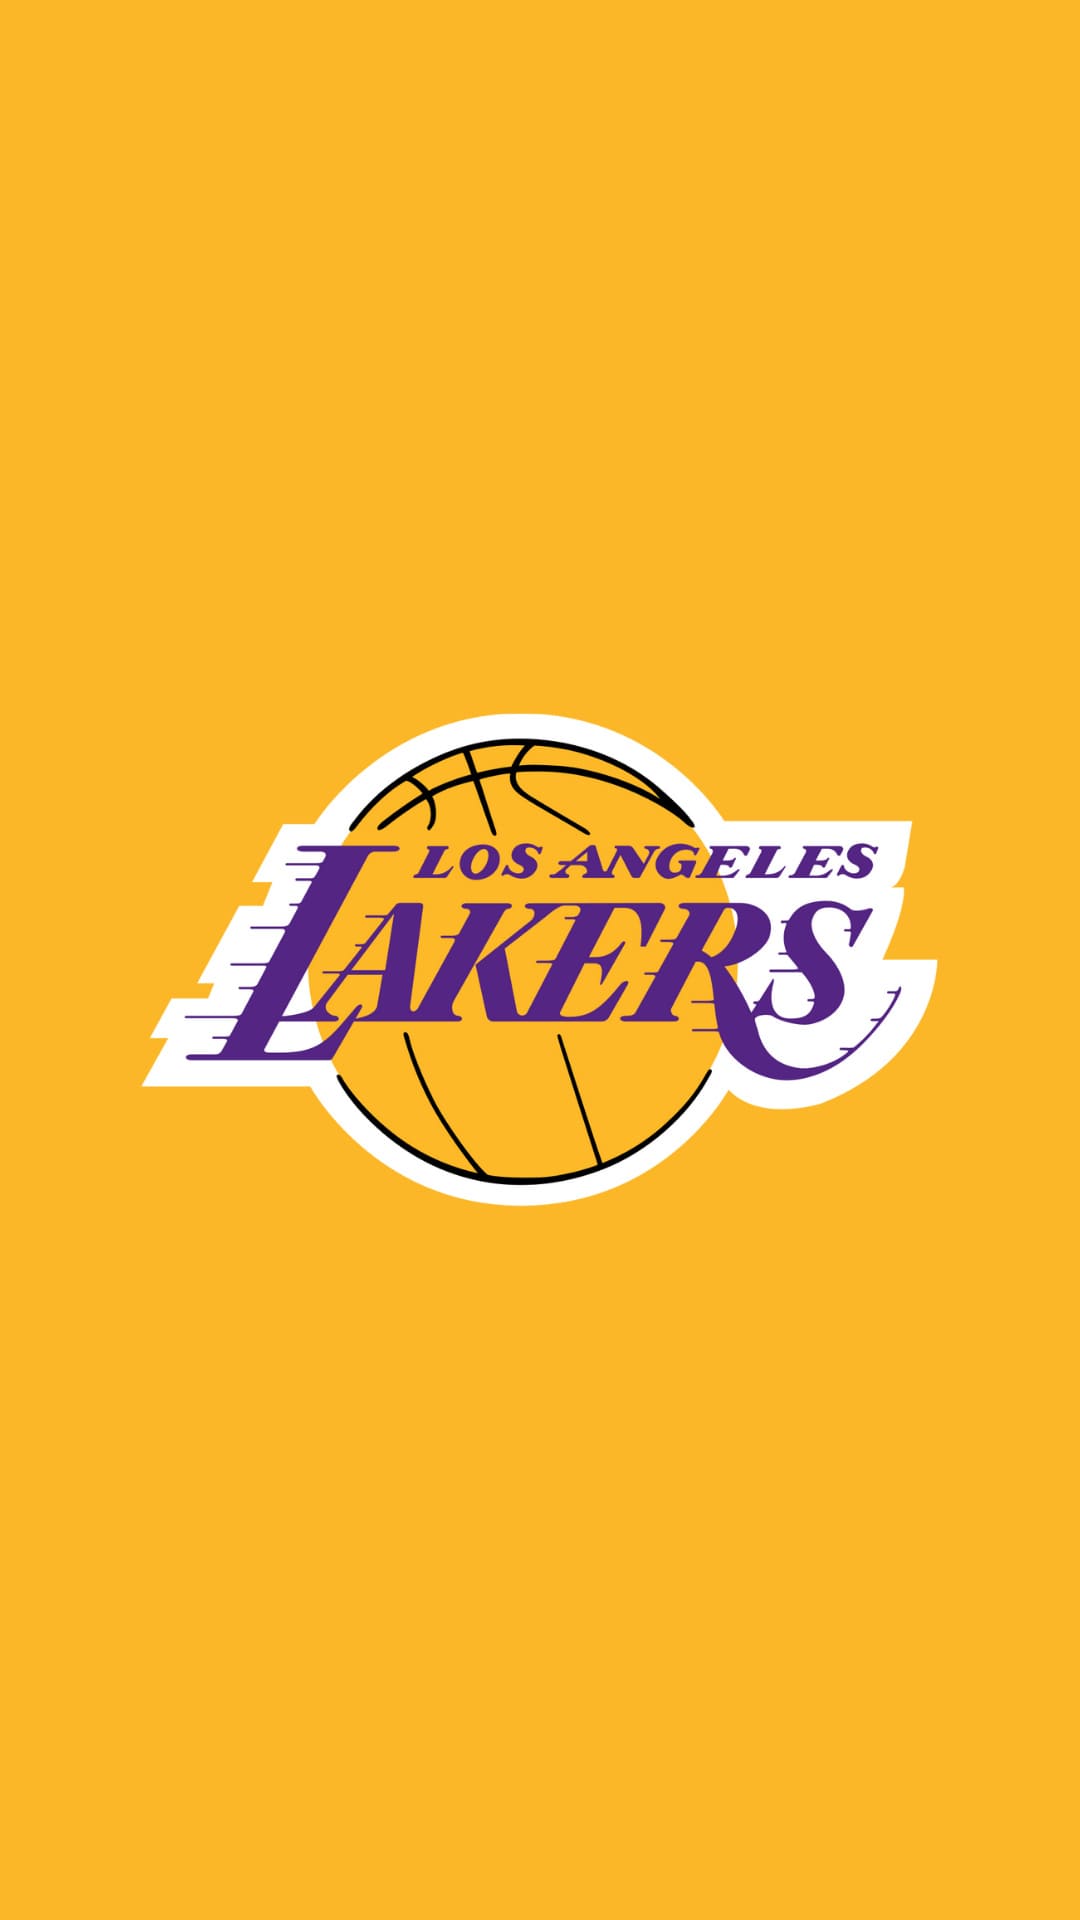 Los Angeles Lakers Android Wallpaper